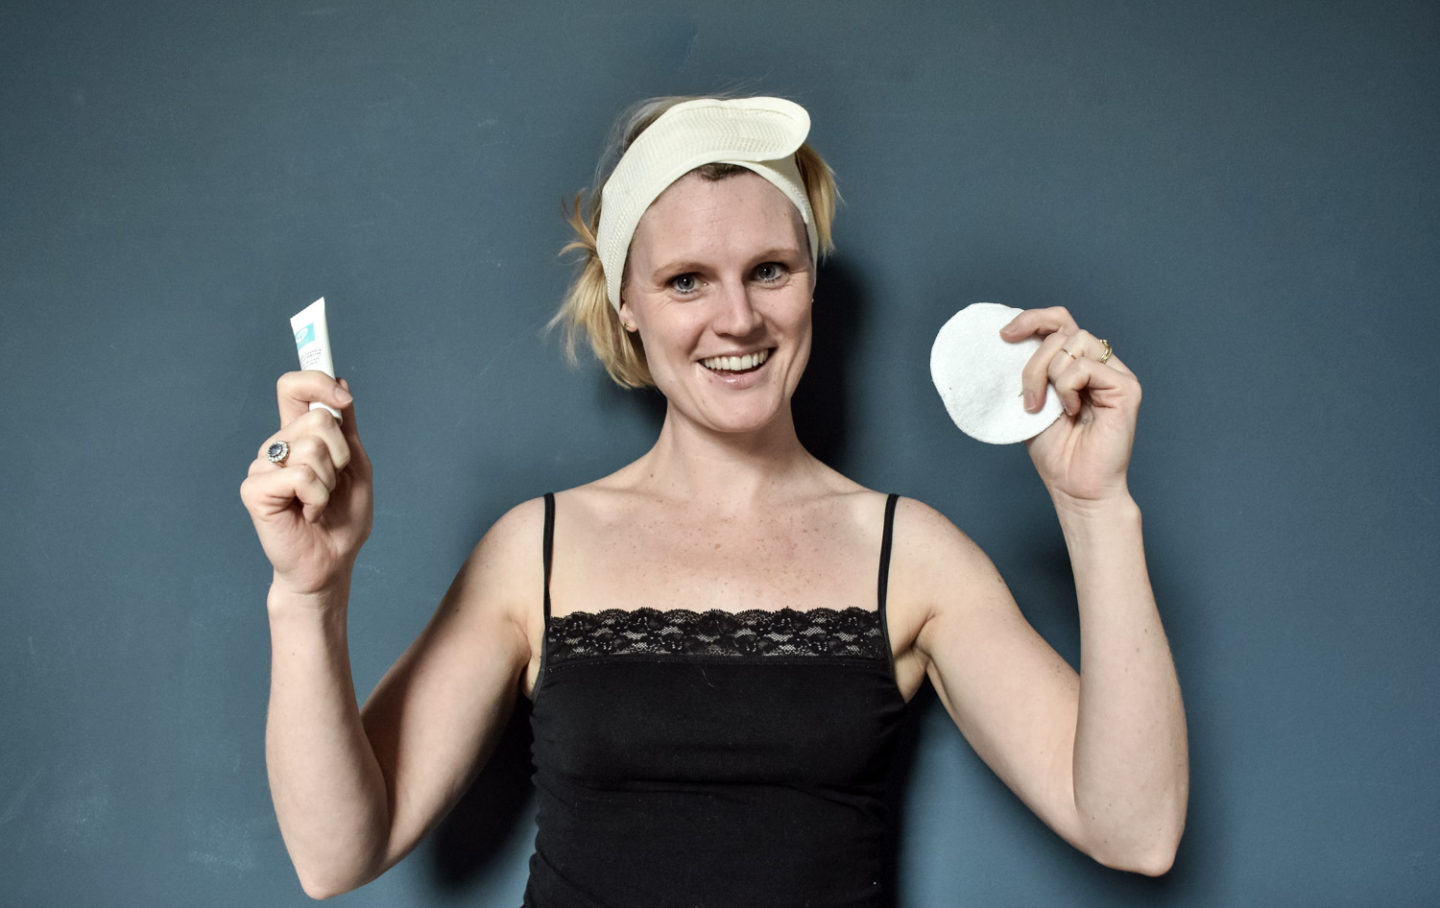 Reusable cotton pad and head band from Green People's organic beauty advent calendar